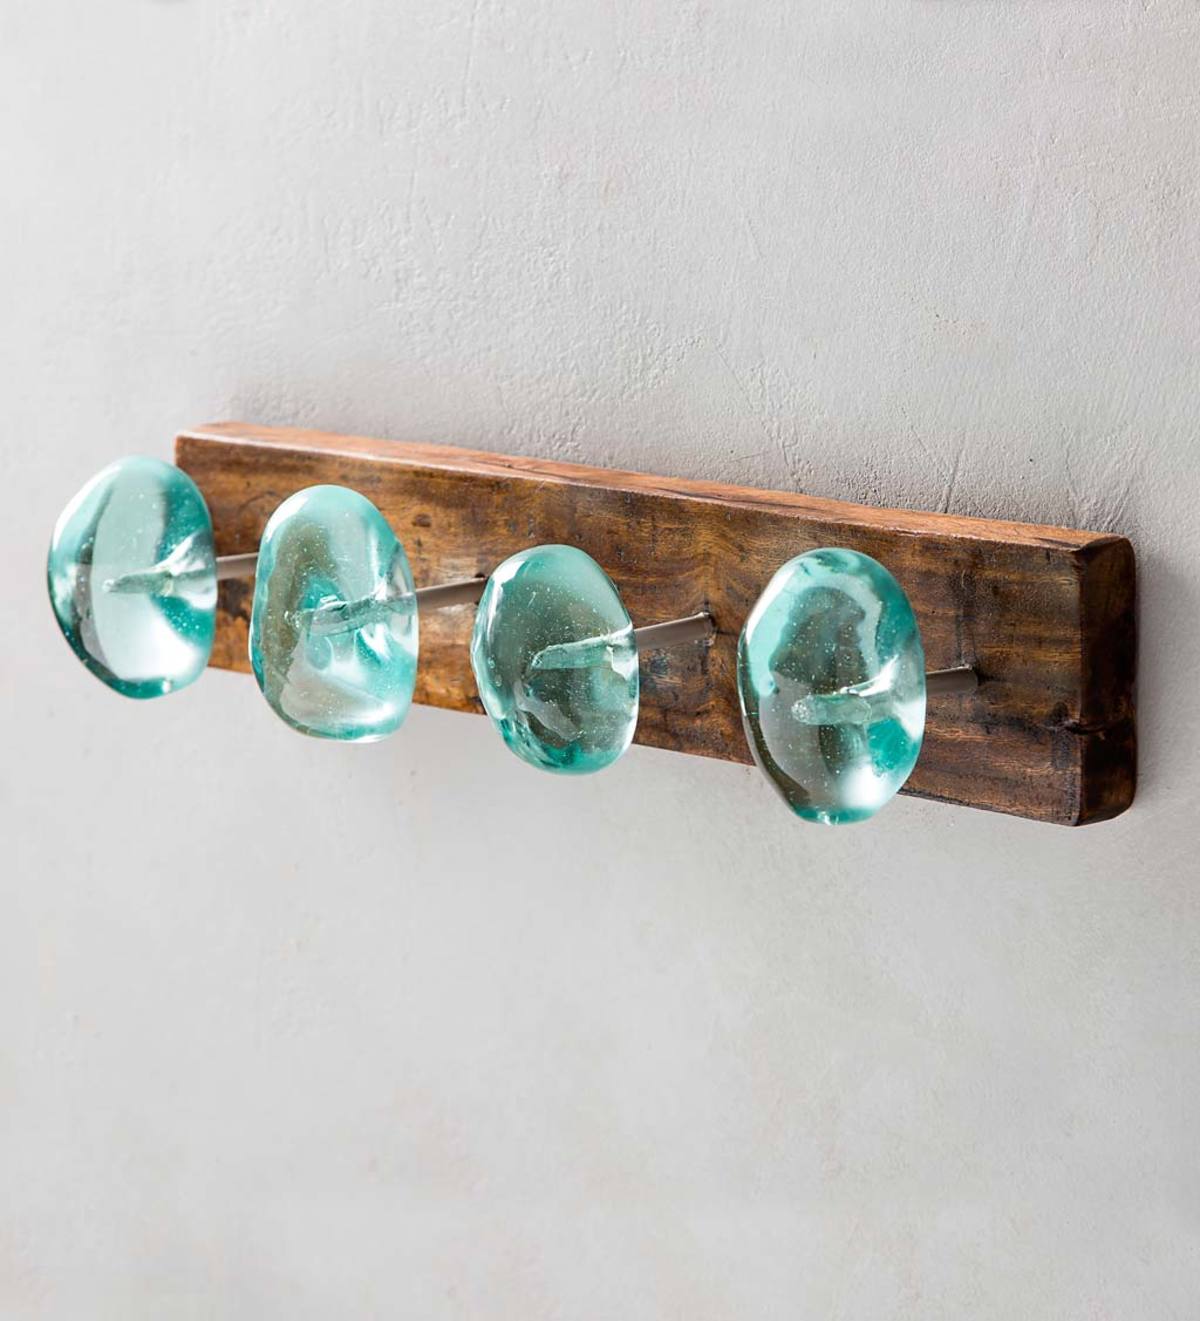 Recycled Glass and Reclaimed Wood Hooks - 4 Hook